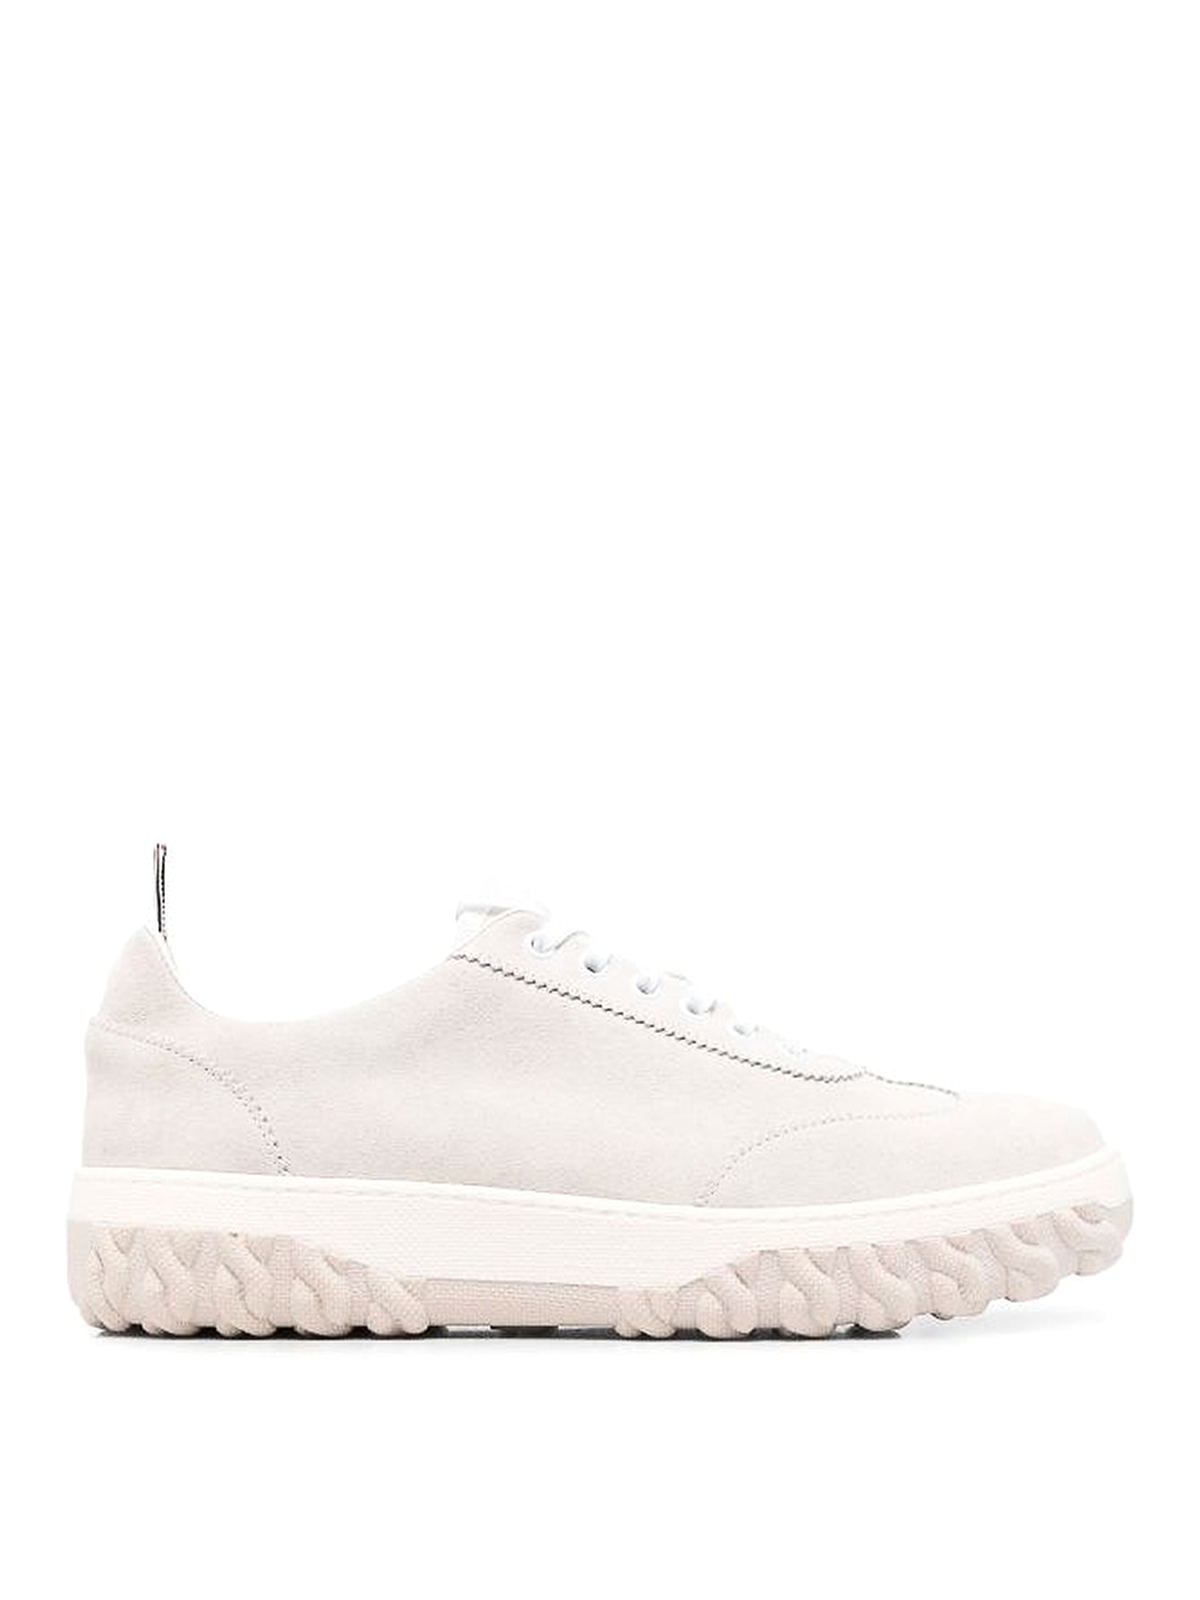 Thom Browne Grosgrain-loop Trim Lace-up Trainers In White